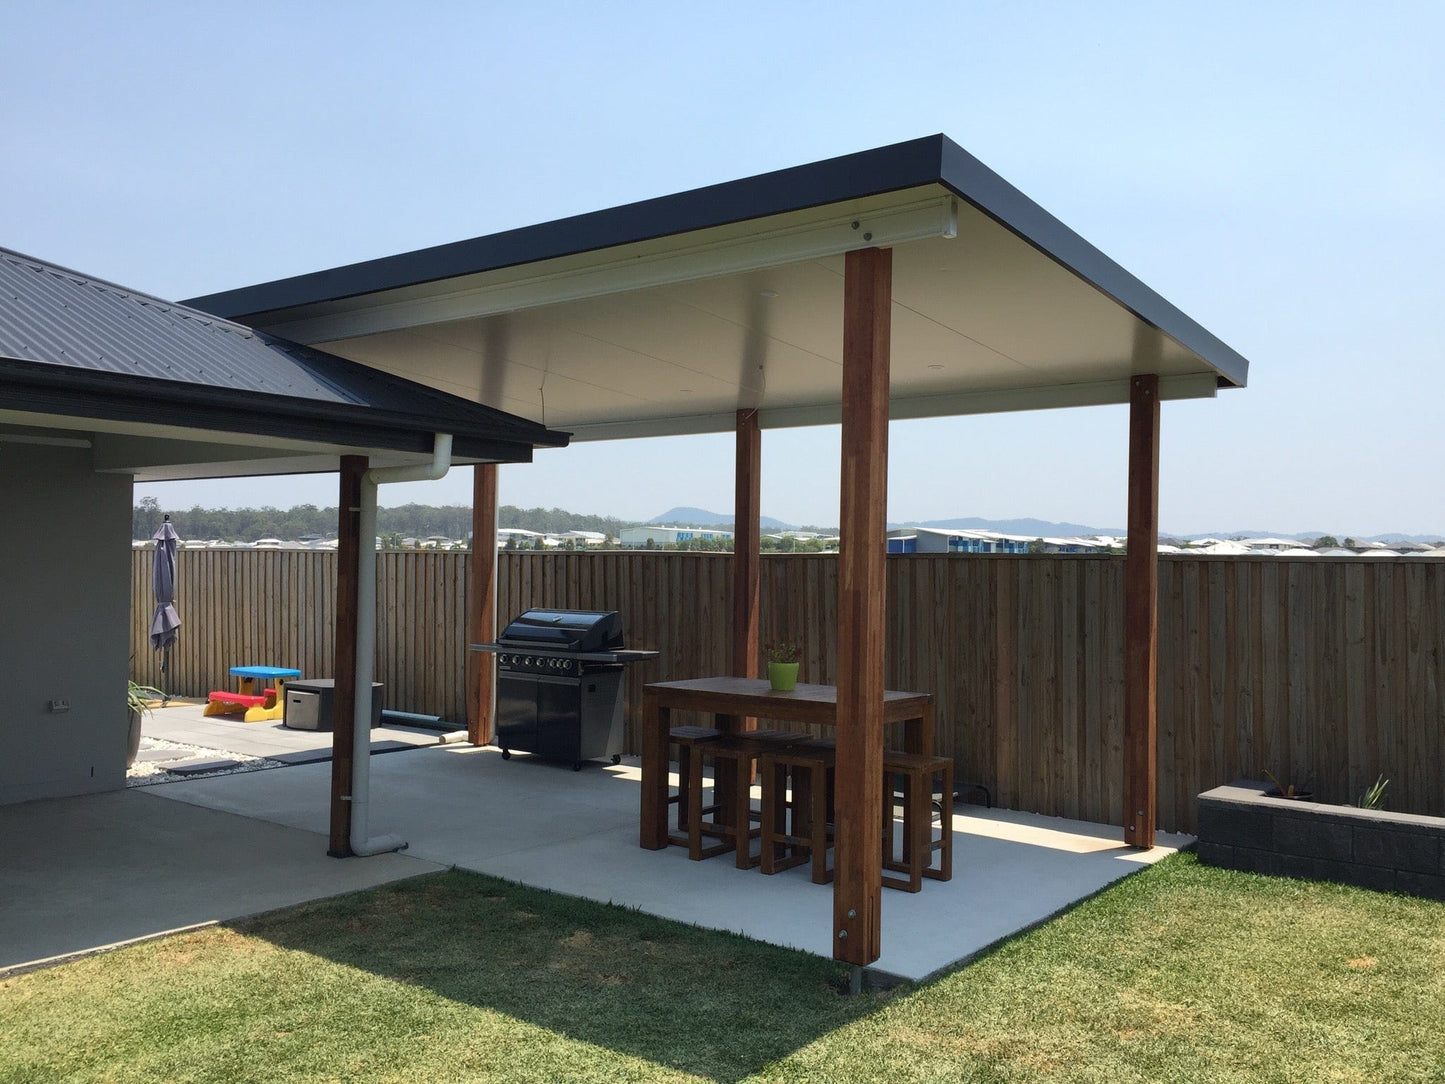 Insulated Flyover Patio Roof- 11m x 7m- Supply & Install QHI National